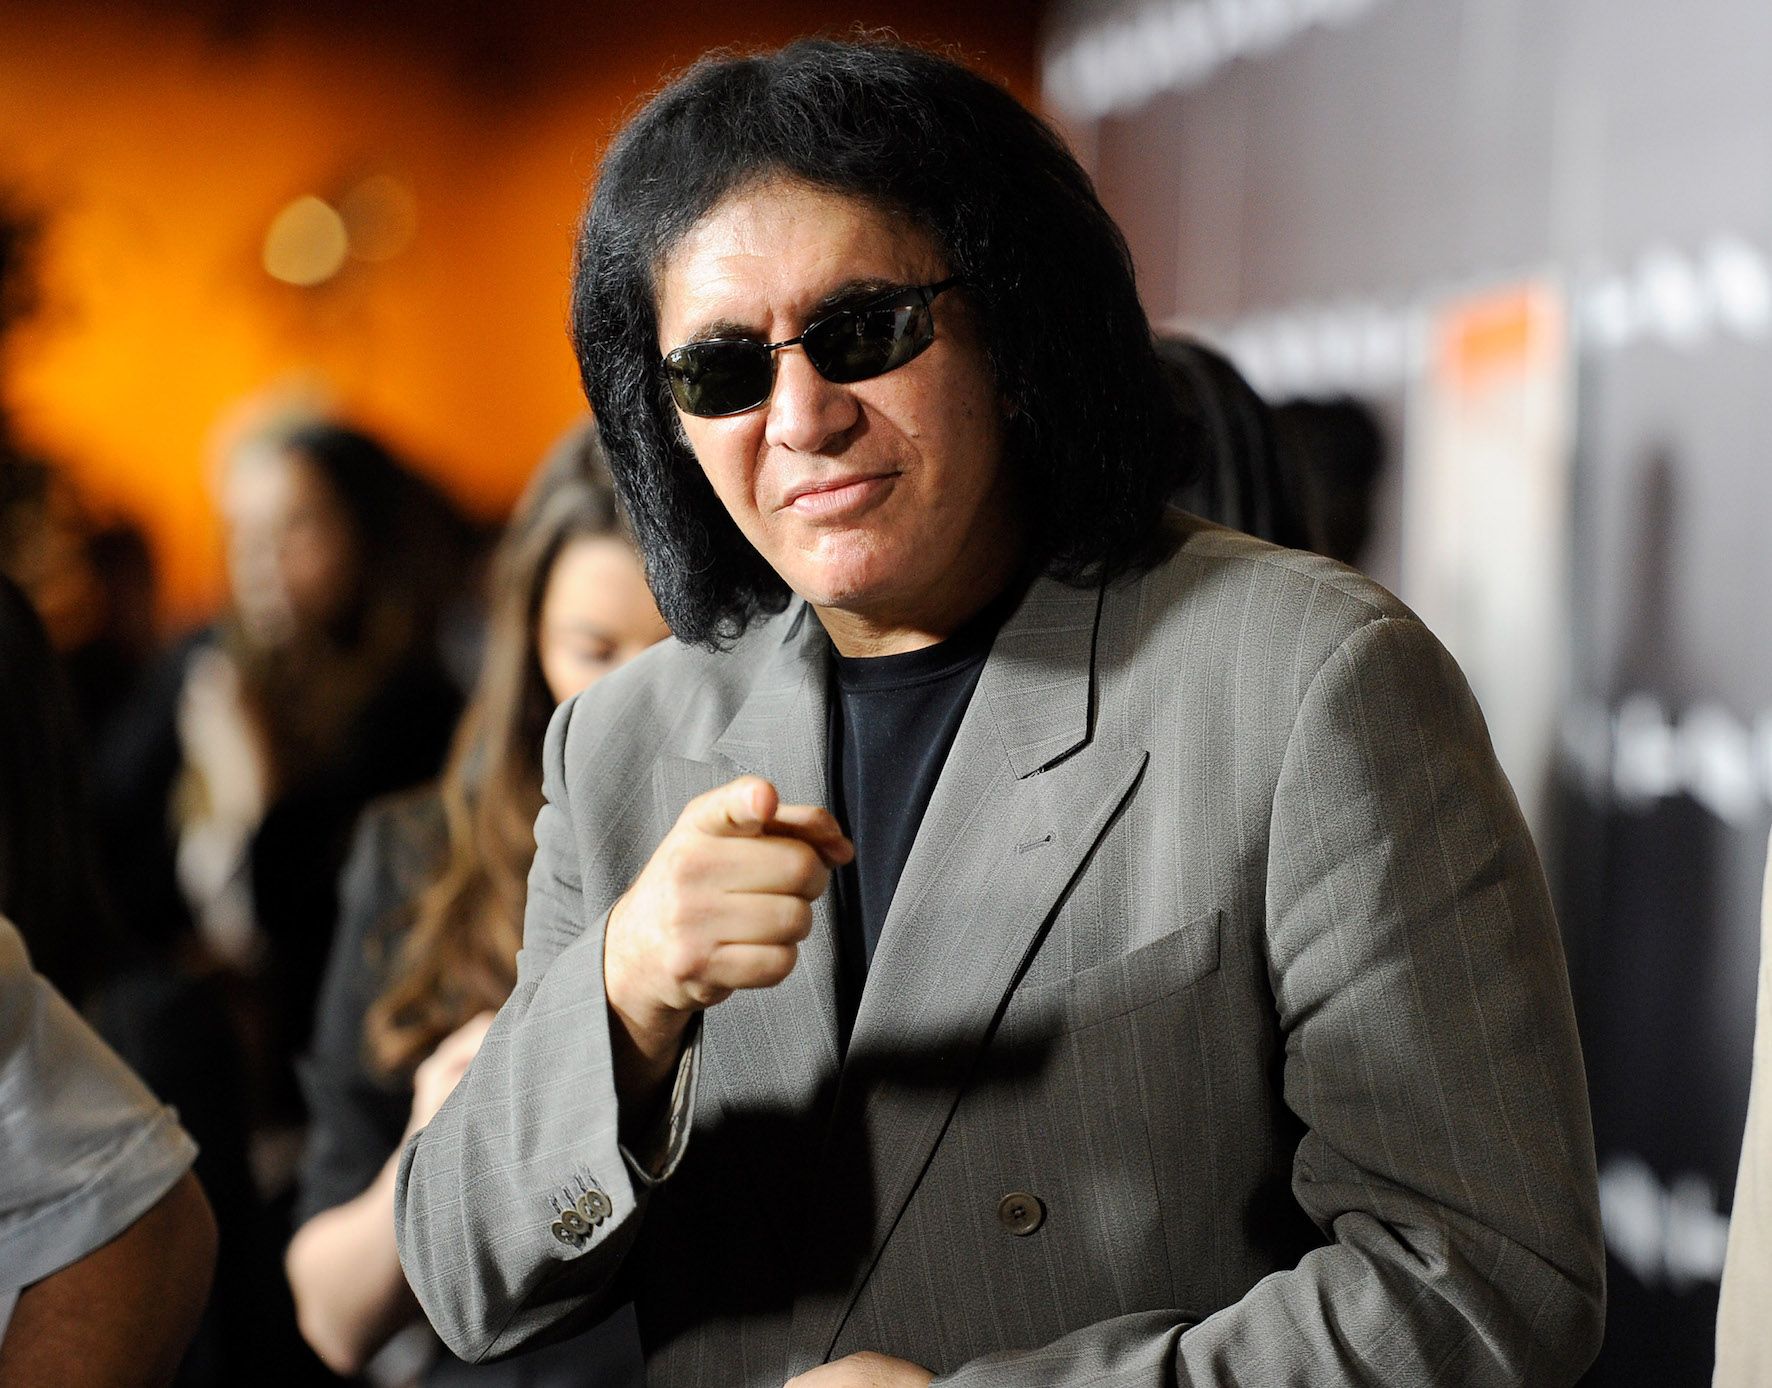 KISS star Gene Simmons denies sexual battery allegations against pic